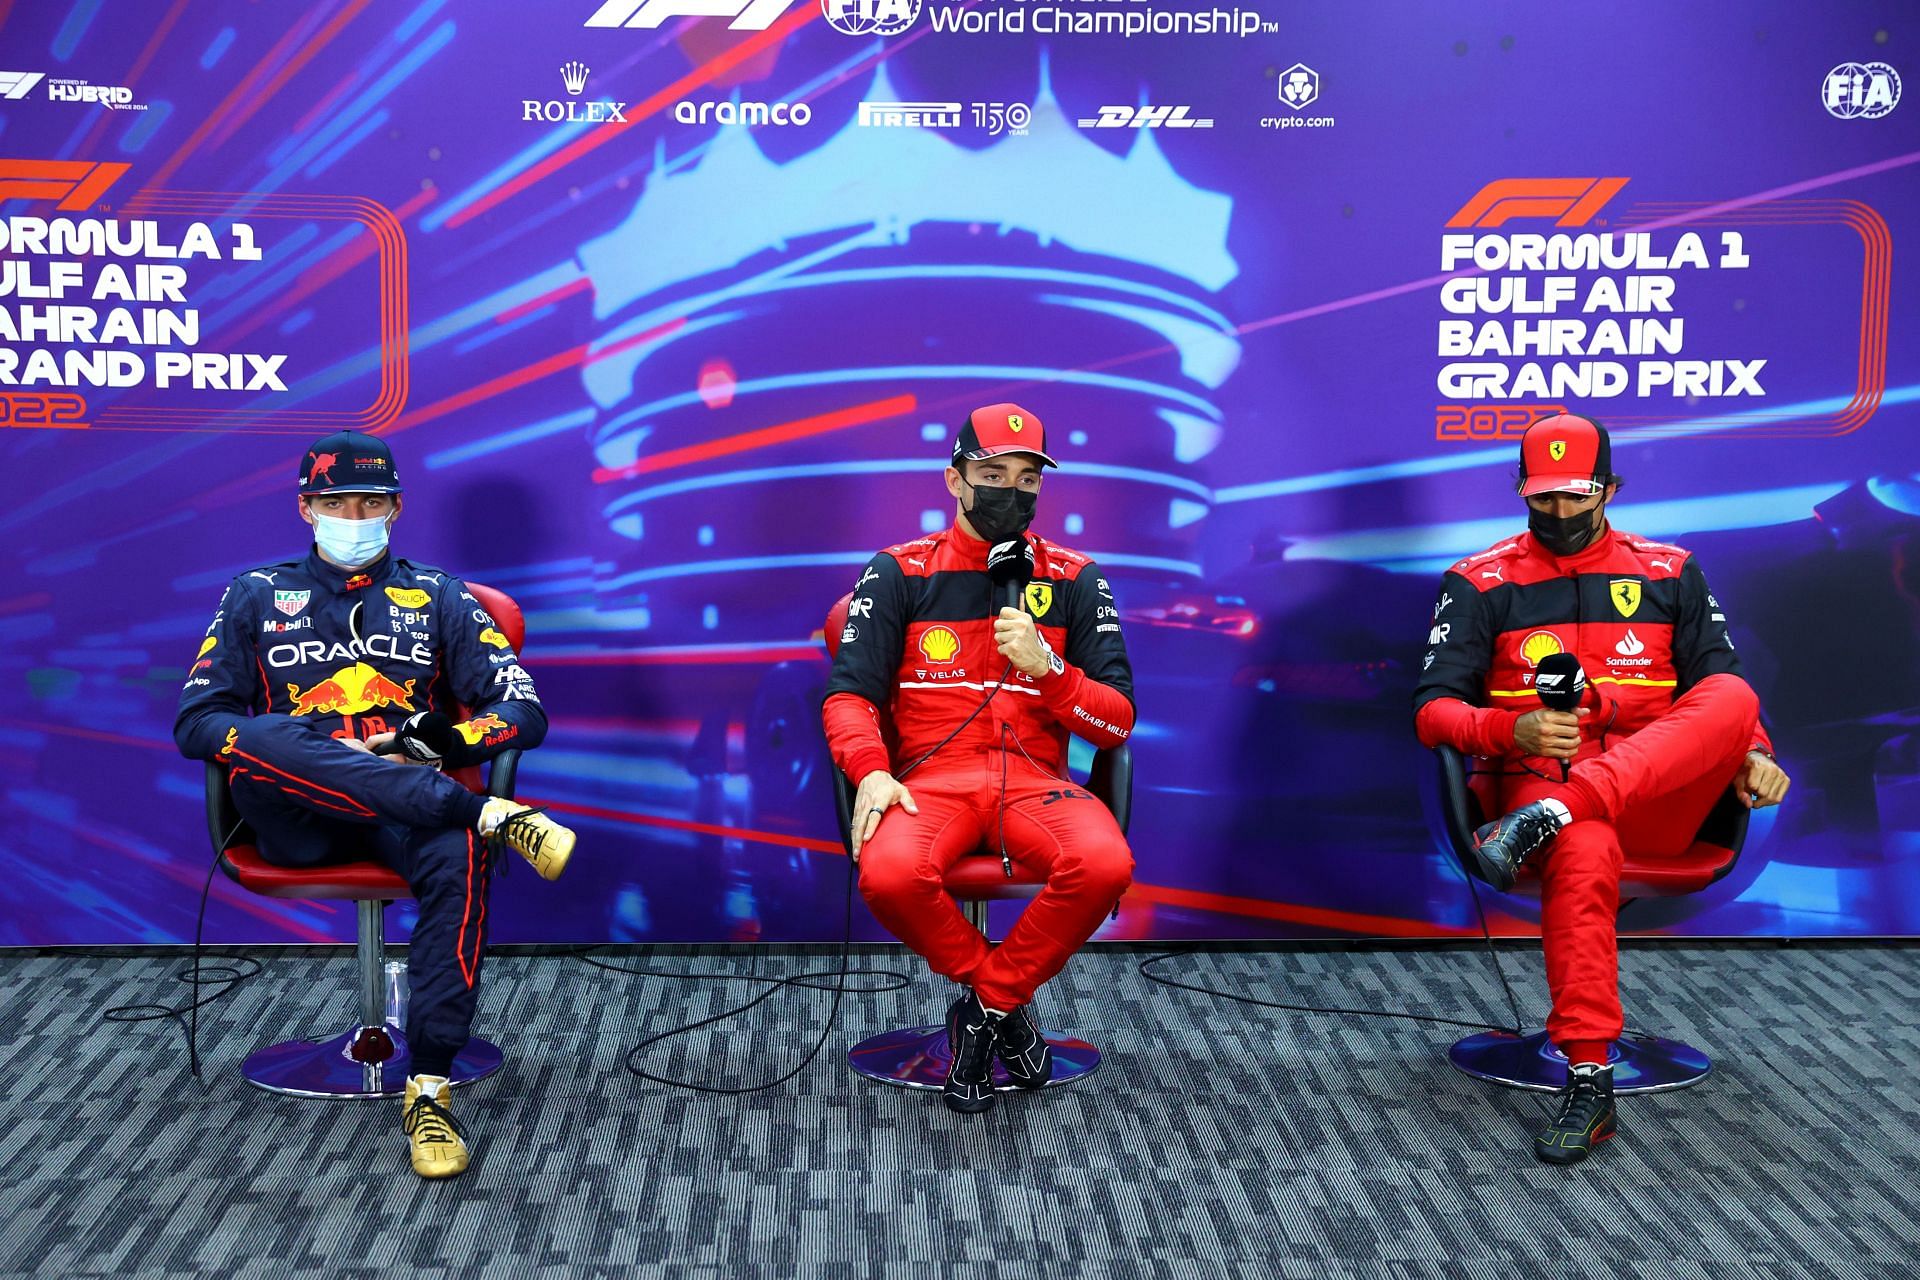 (L to R) Max Verstappen, Charles Leclerc and Carlos Sainz after the qualification session at the 2022 Bahrain GP